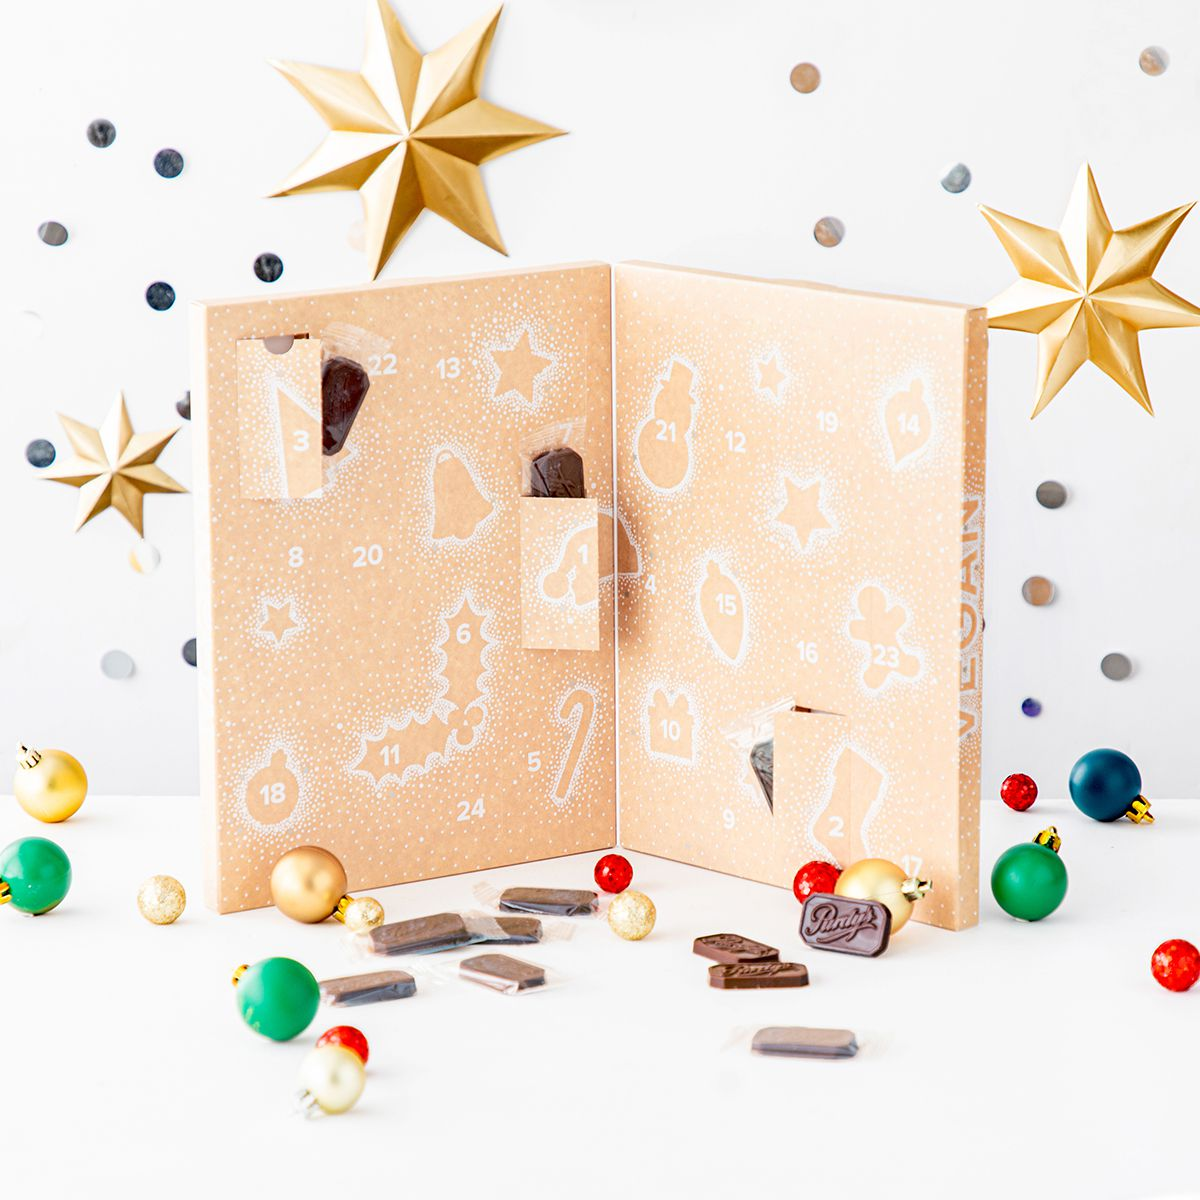 Purdys Chocolate Advent Calendar Reviews Get All The Details At Hello